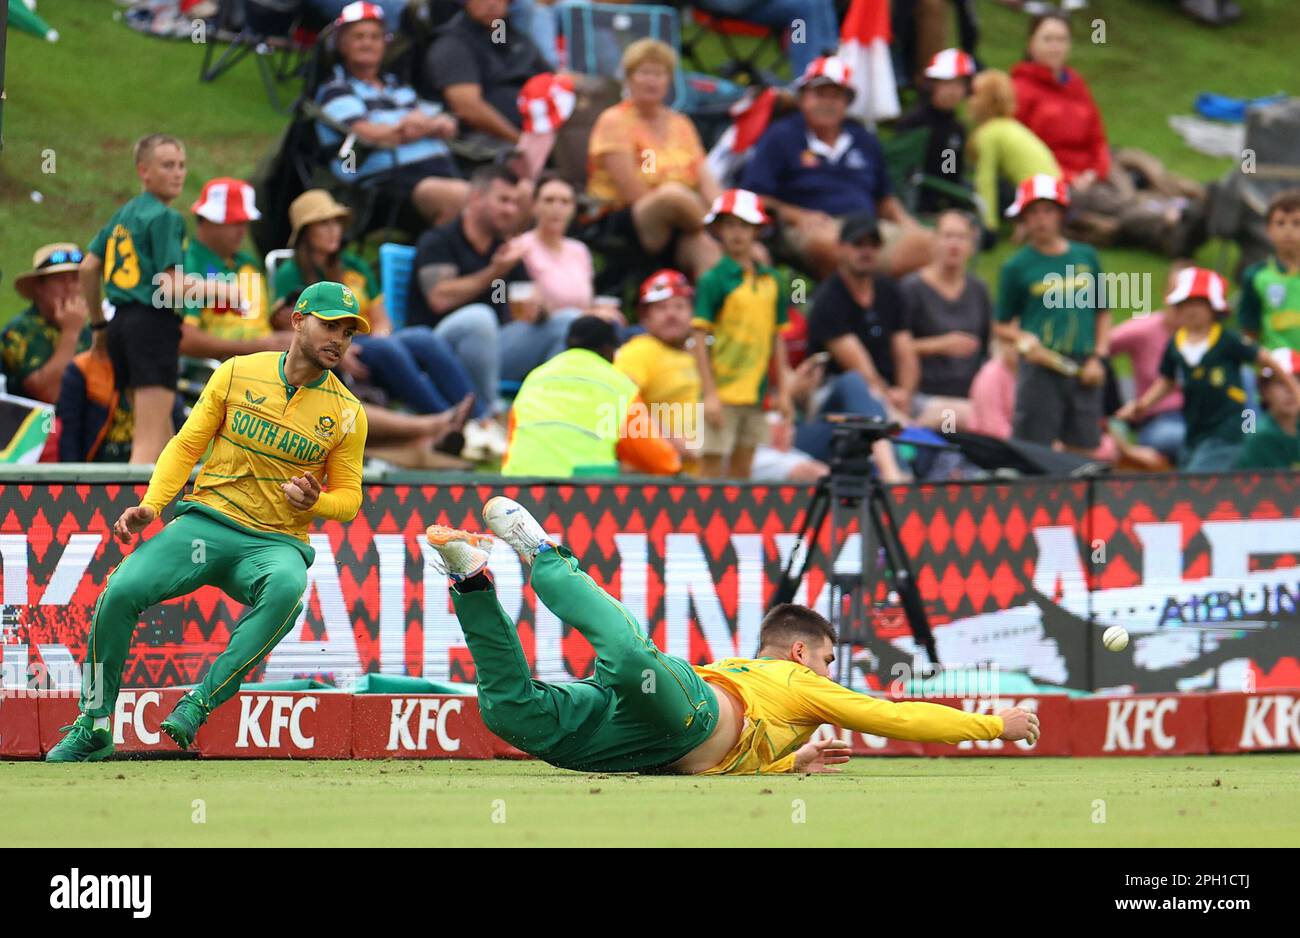 Cricket - First Twenty20 - South Africa v West Indies - SuperSport Park Cricket Stadium, Centurion, South Africa - March 25, 2023 South Africa's Rilee Rossouw and Reeza Hendricks in action in the field REUTERS/Siphiwe Sibeko Stock Photo